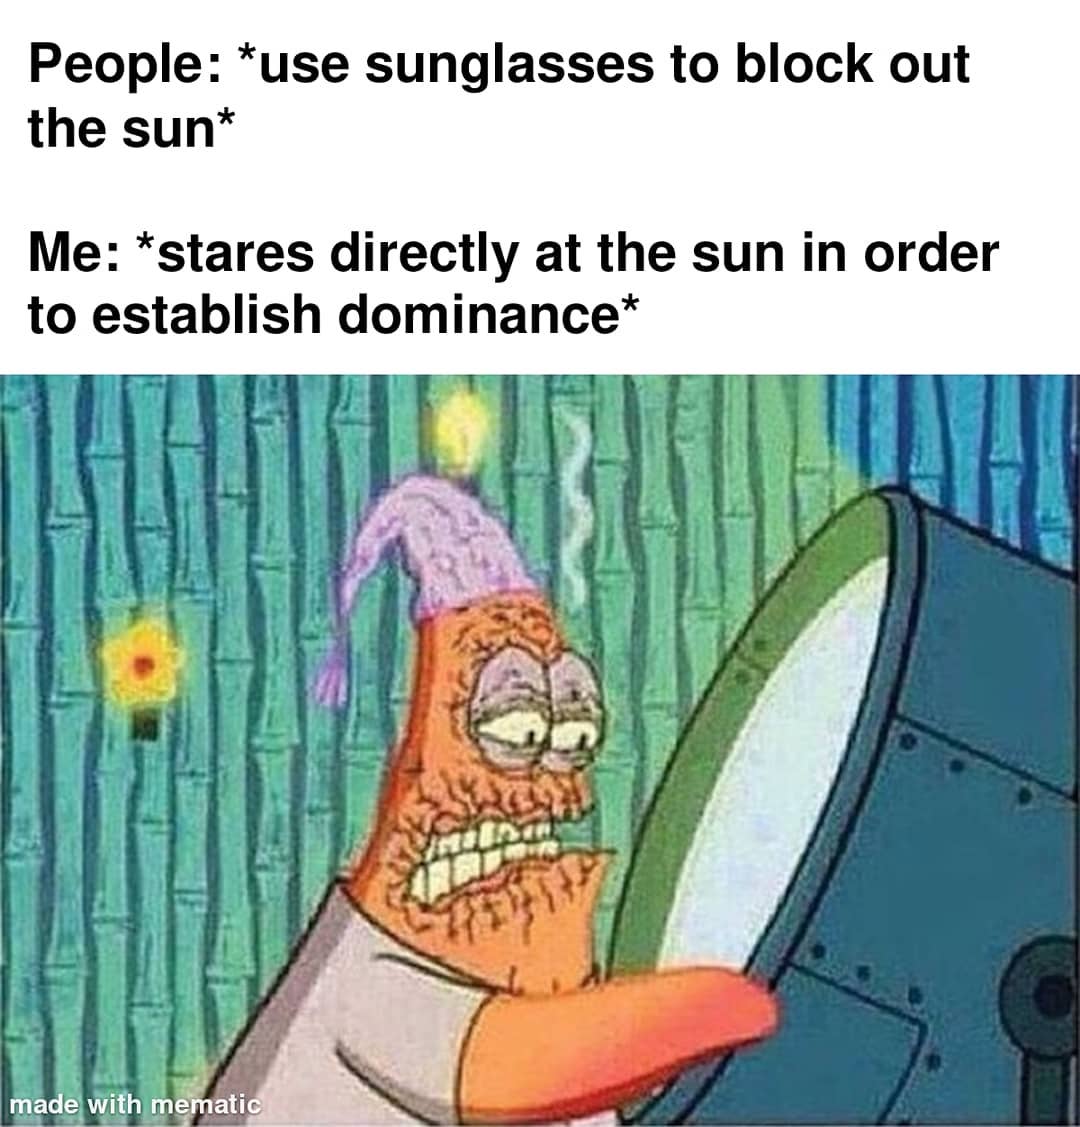 People: Use sunglasses to block out the sun. Me: Stares directly at the sun in order to establish dominance.